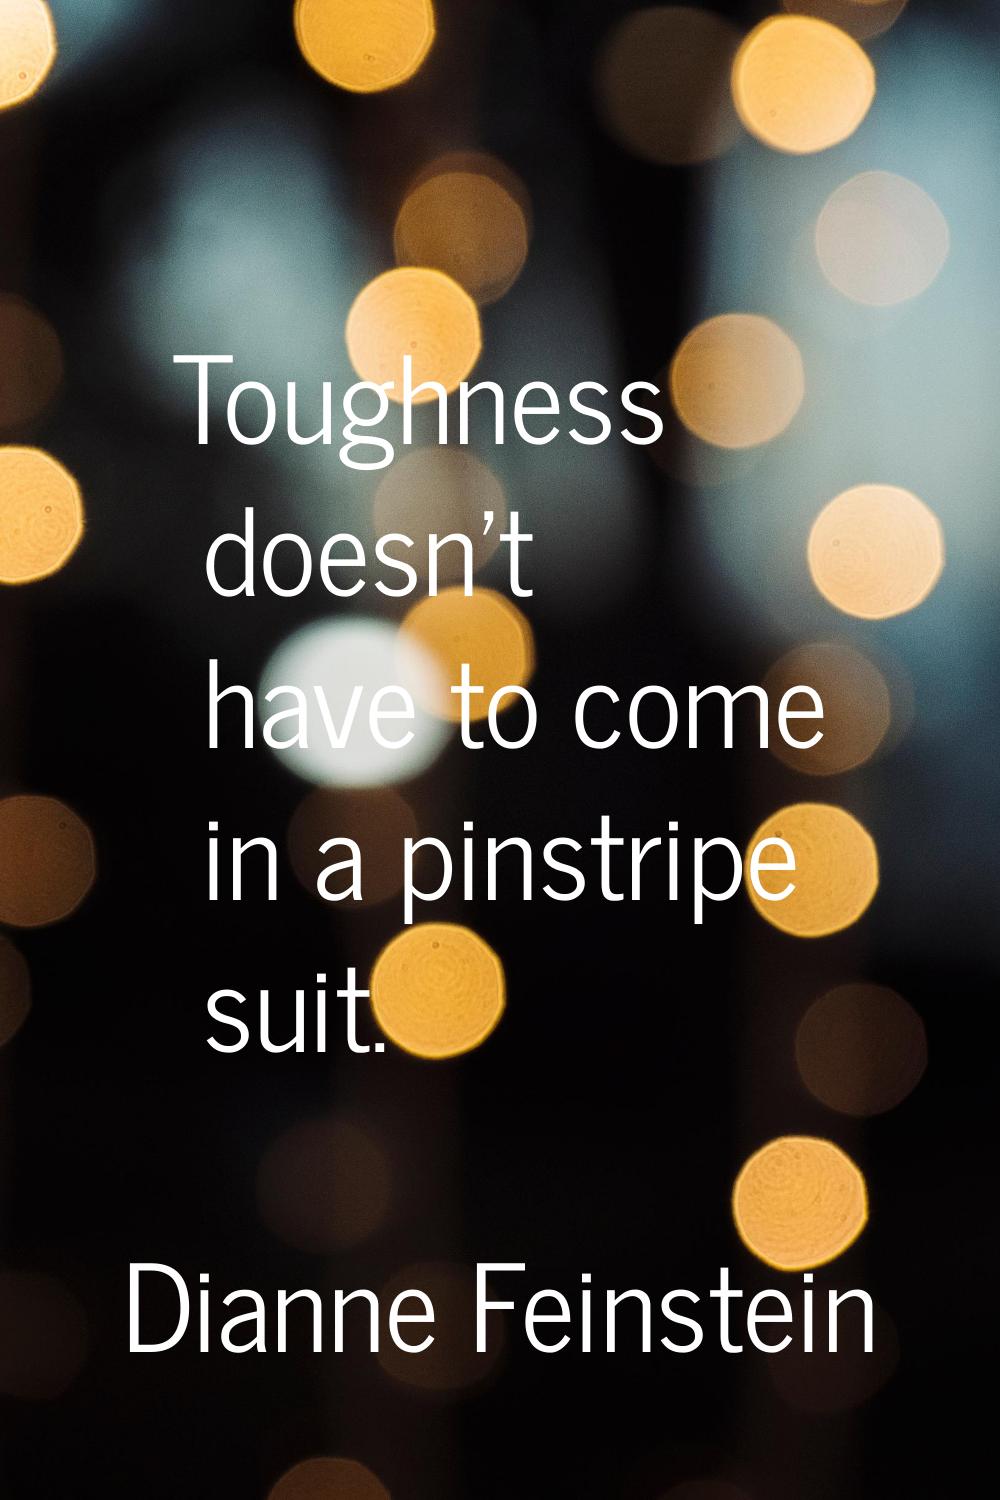 Toughness doesn't have to come in a pinstripe suit.